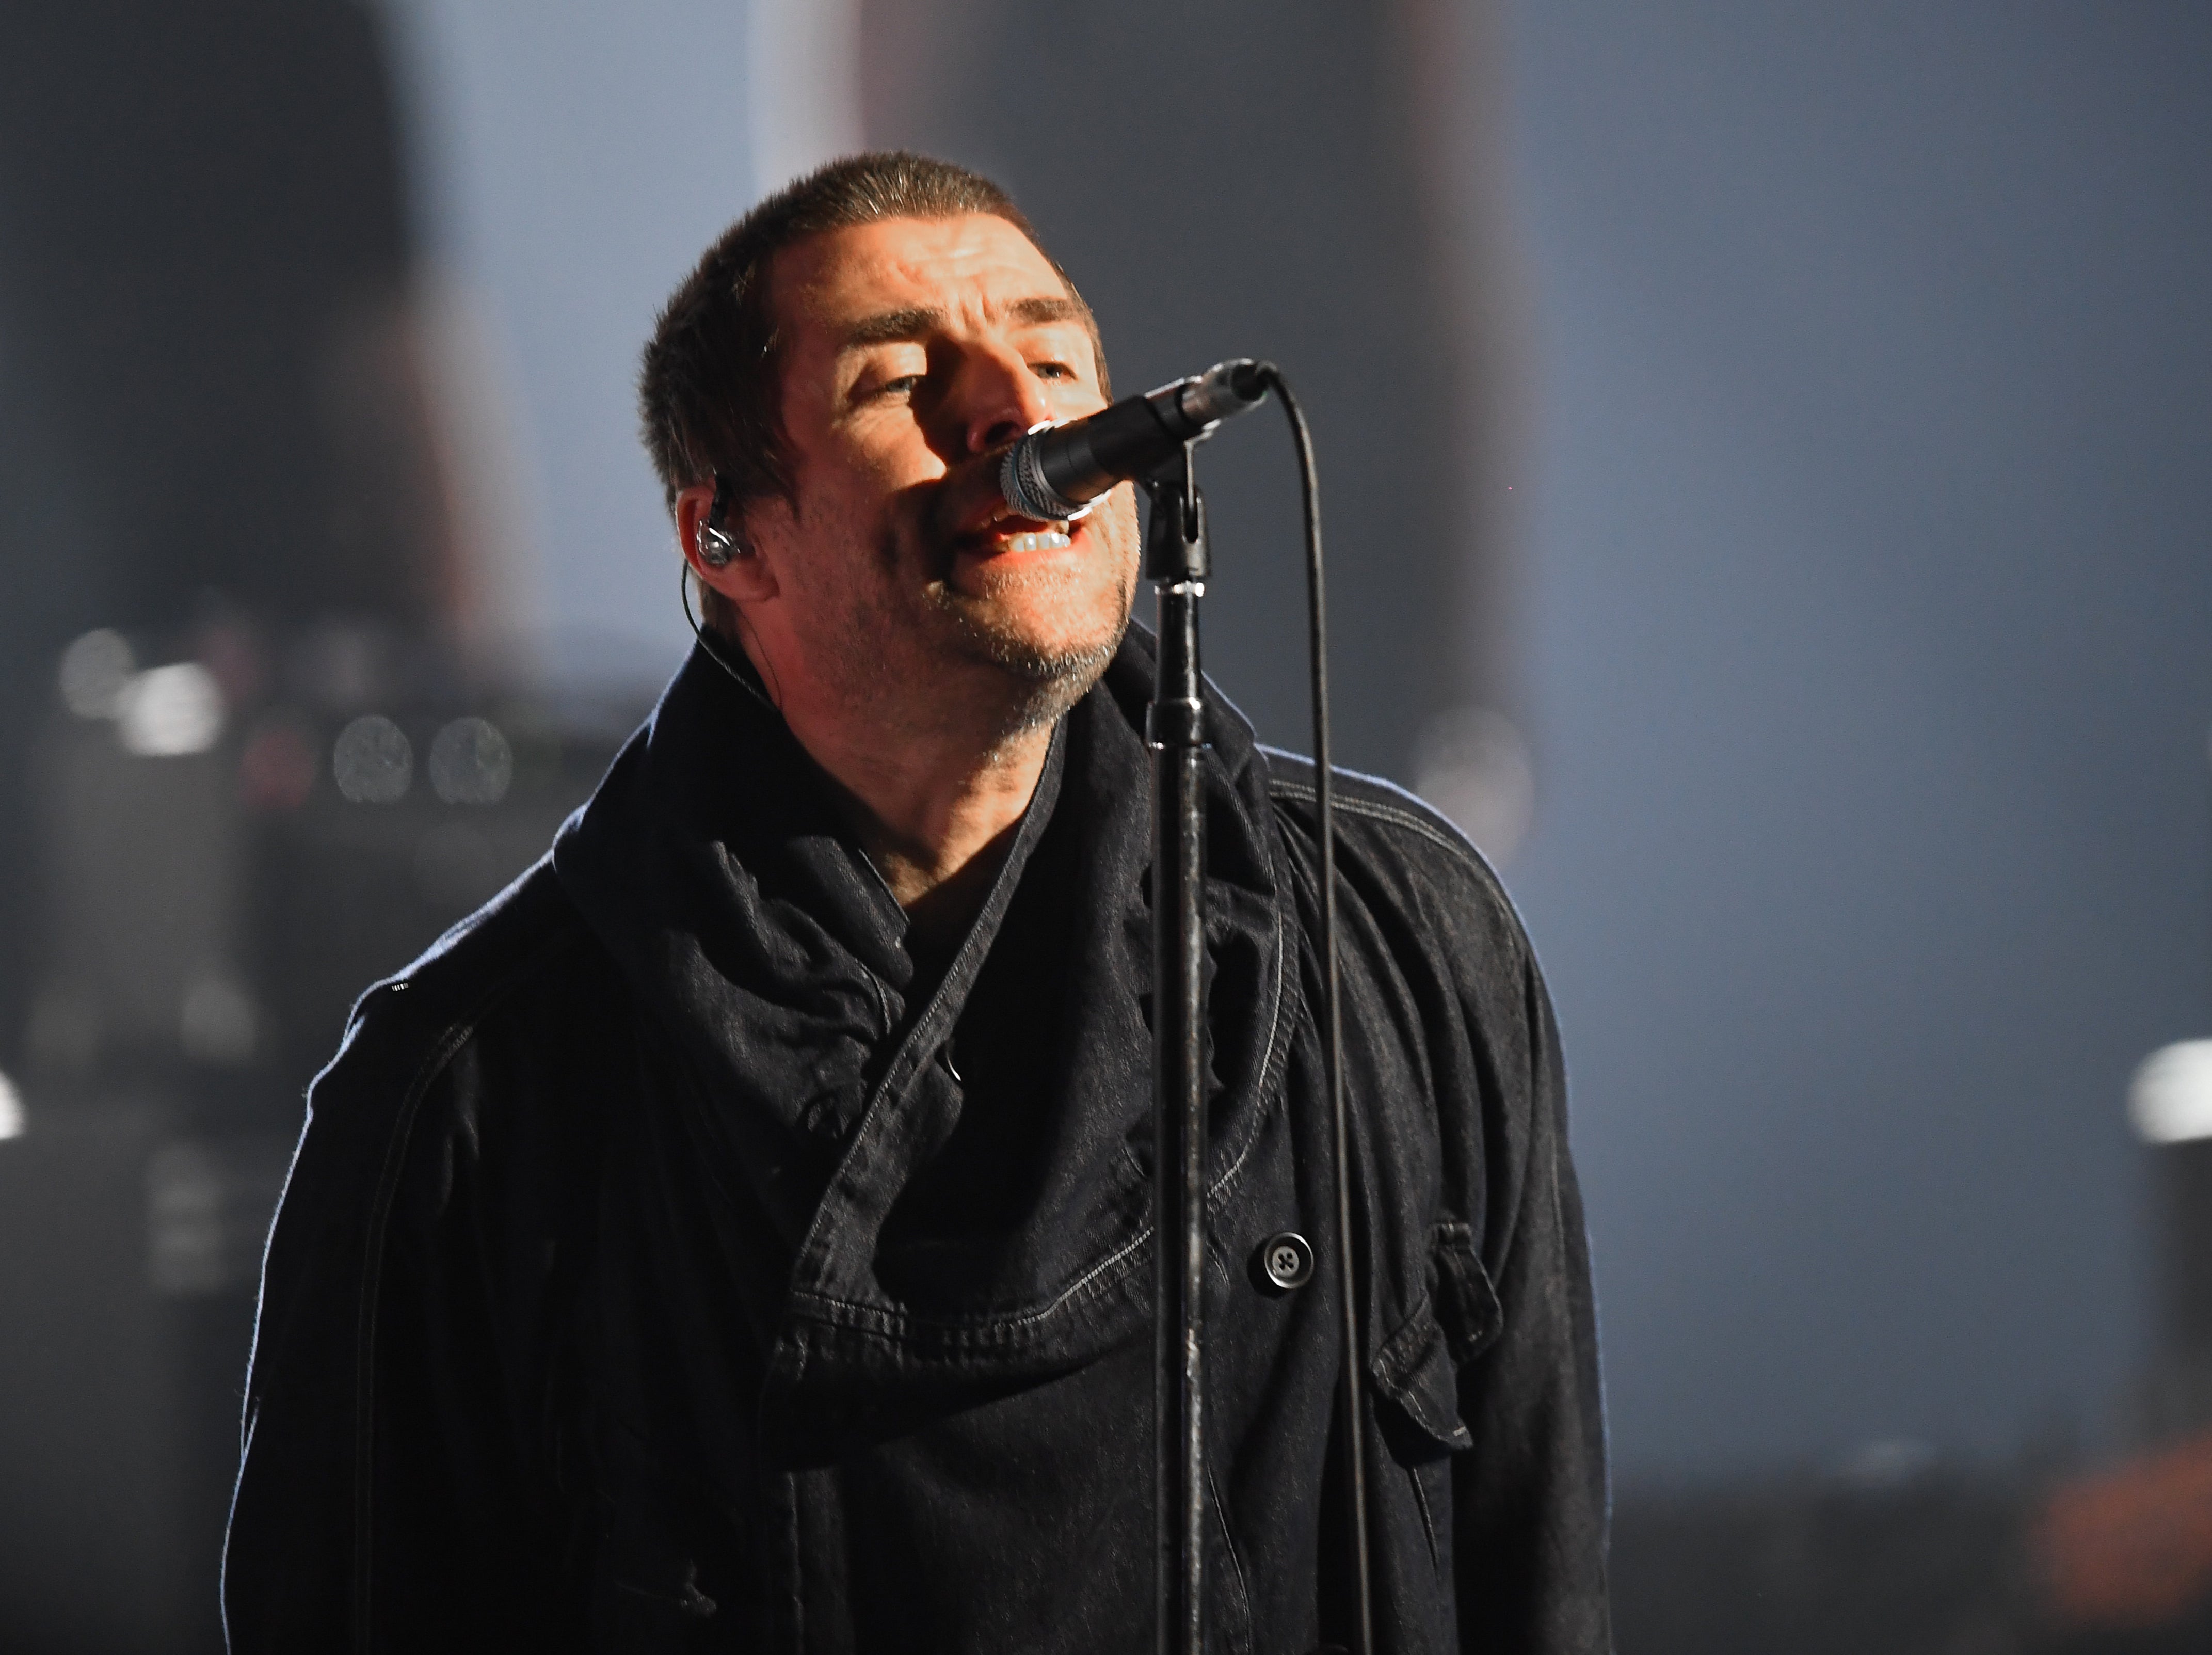 Liam Gallagher is one of the headliners for TRNSMT festival 2021